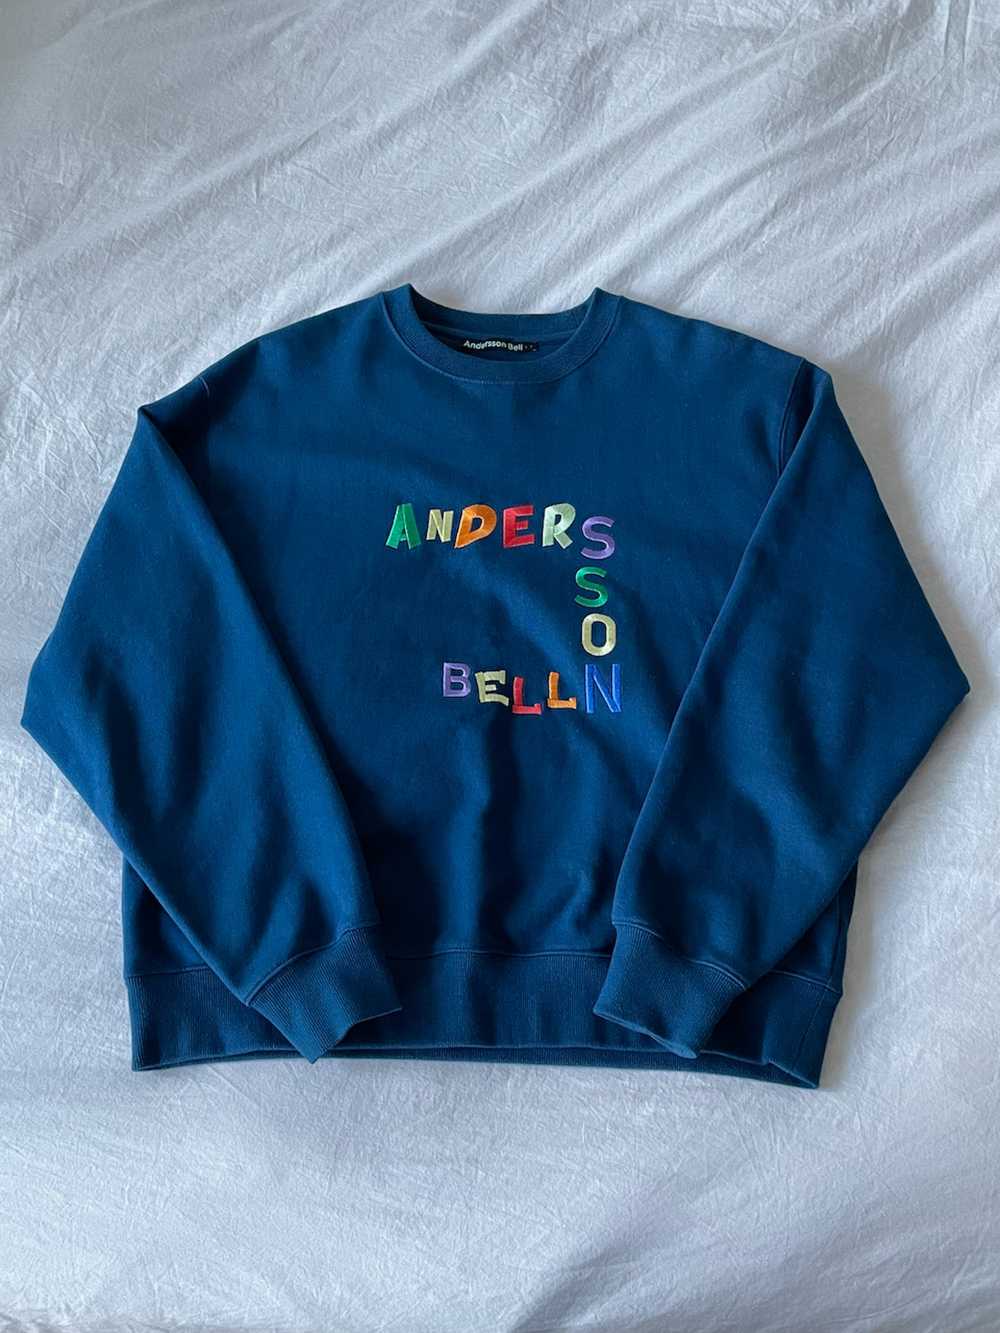 Andersson Bell Andersson Bell Logo Sweater - image 1